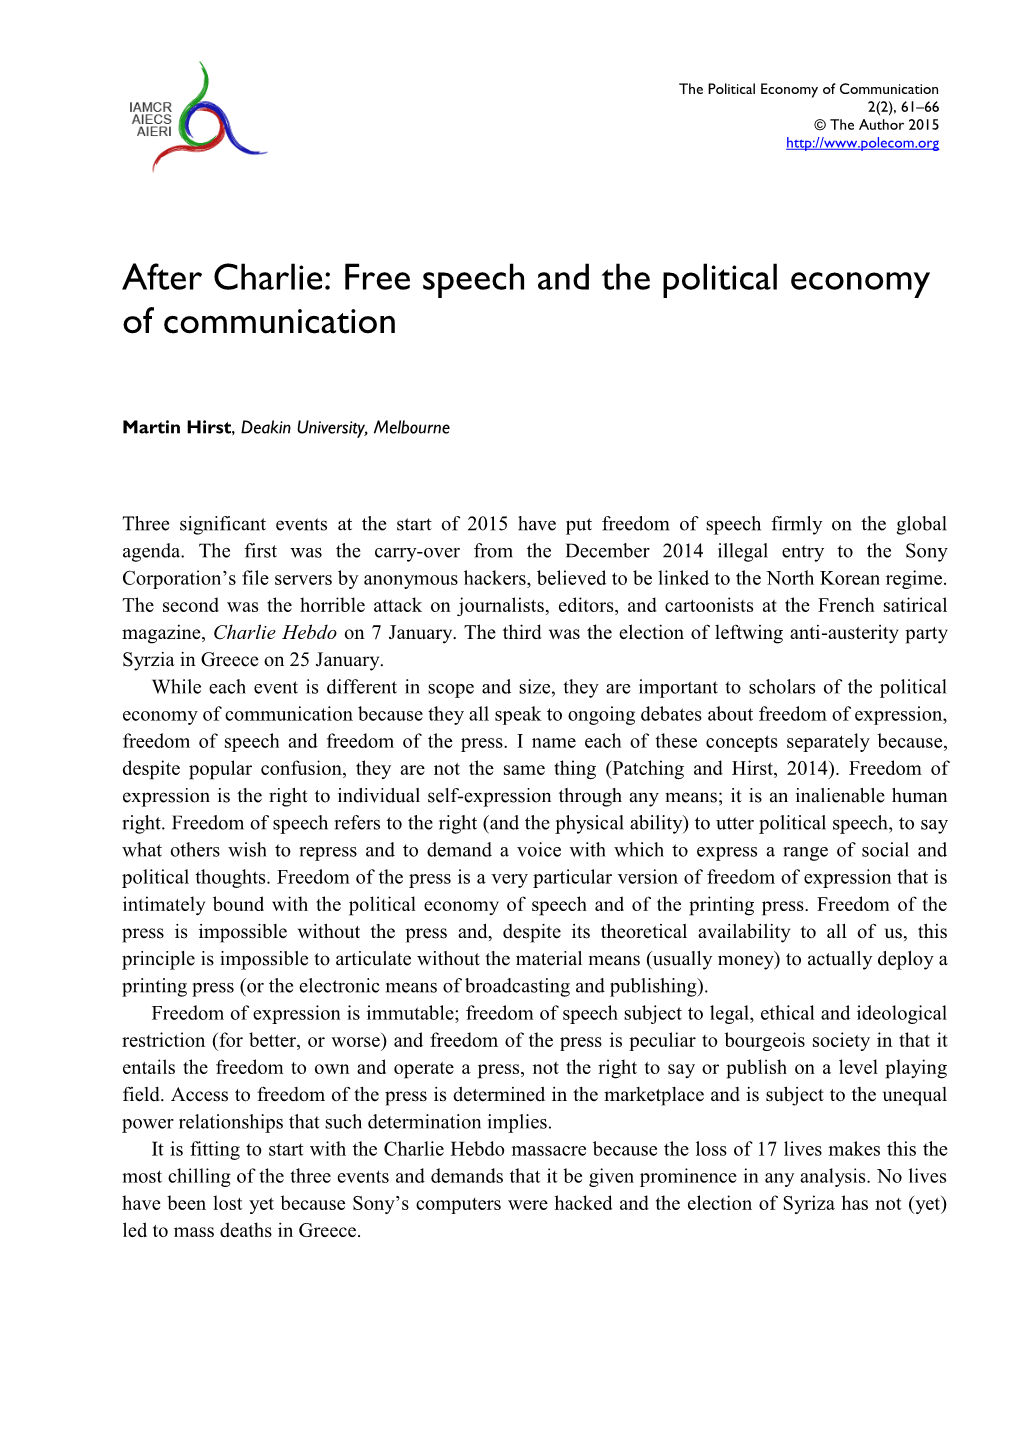 After Charlie: Free Speech and the Political Economy of Communication